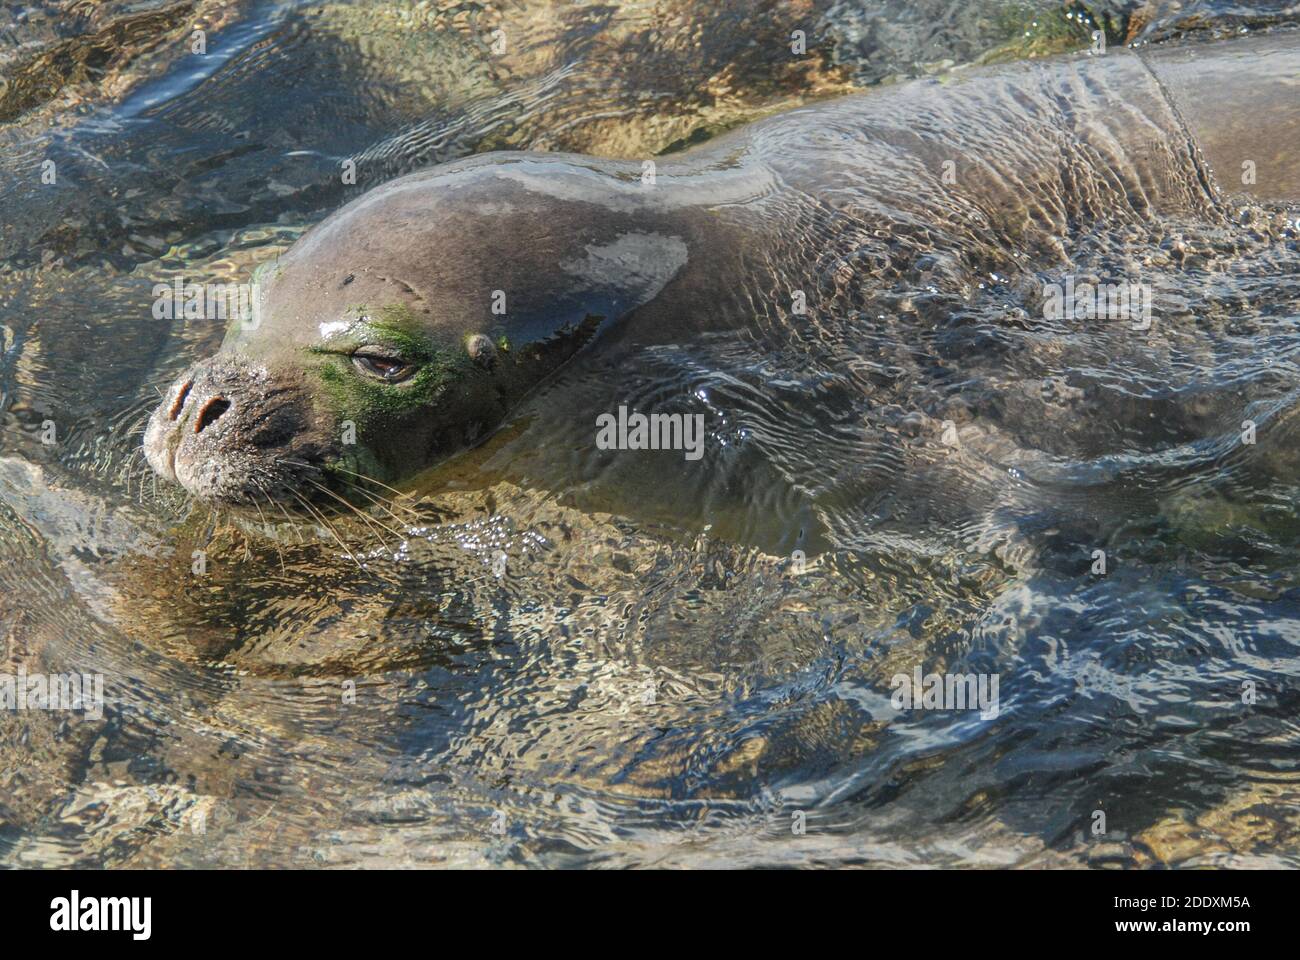 A Hawaiian monk seal (Neomonachus schauinslandi) from Kauai, these endangered seals are endemic to Hawaii and are threatened with extinction. Stock Photo